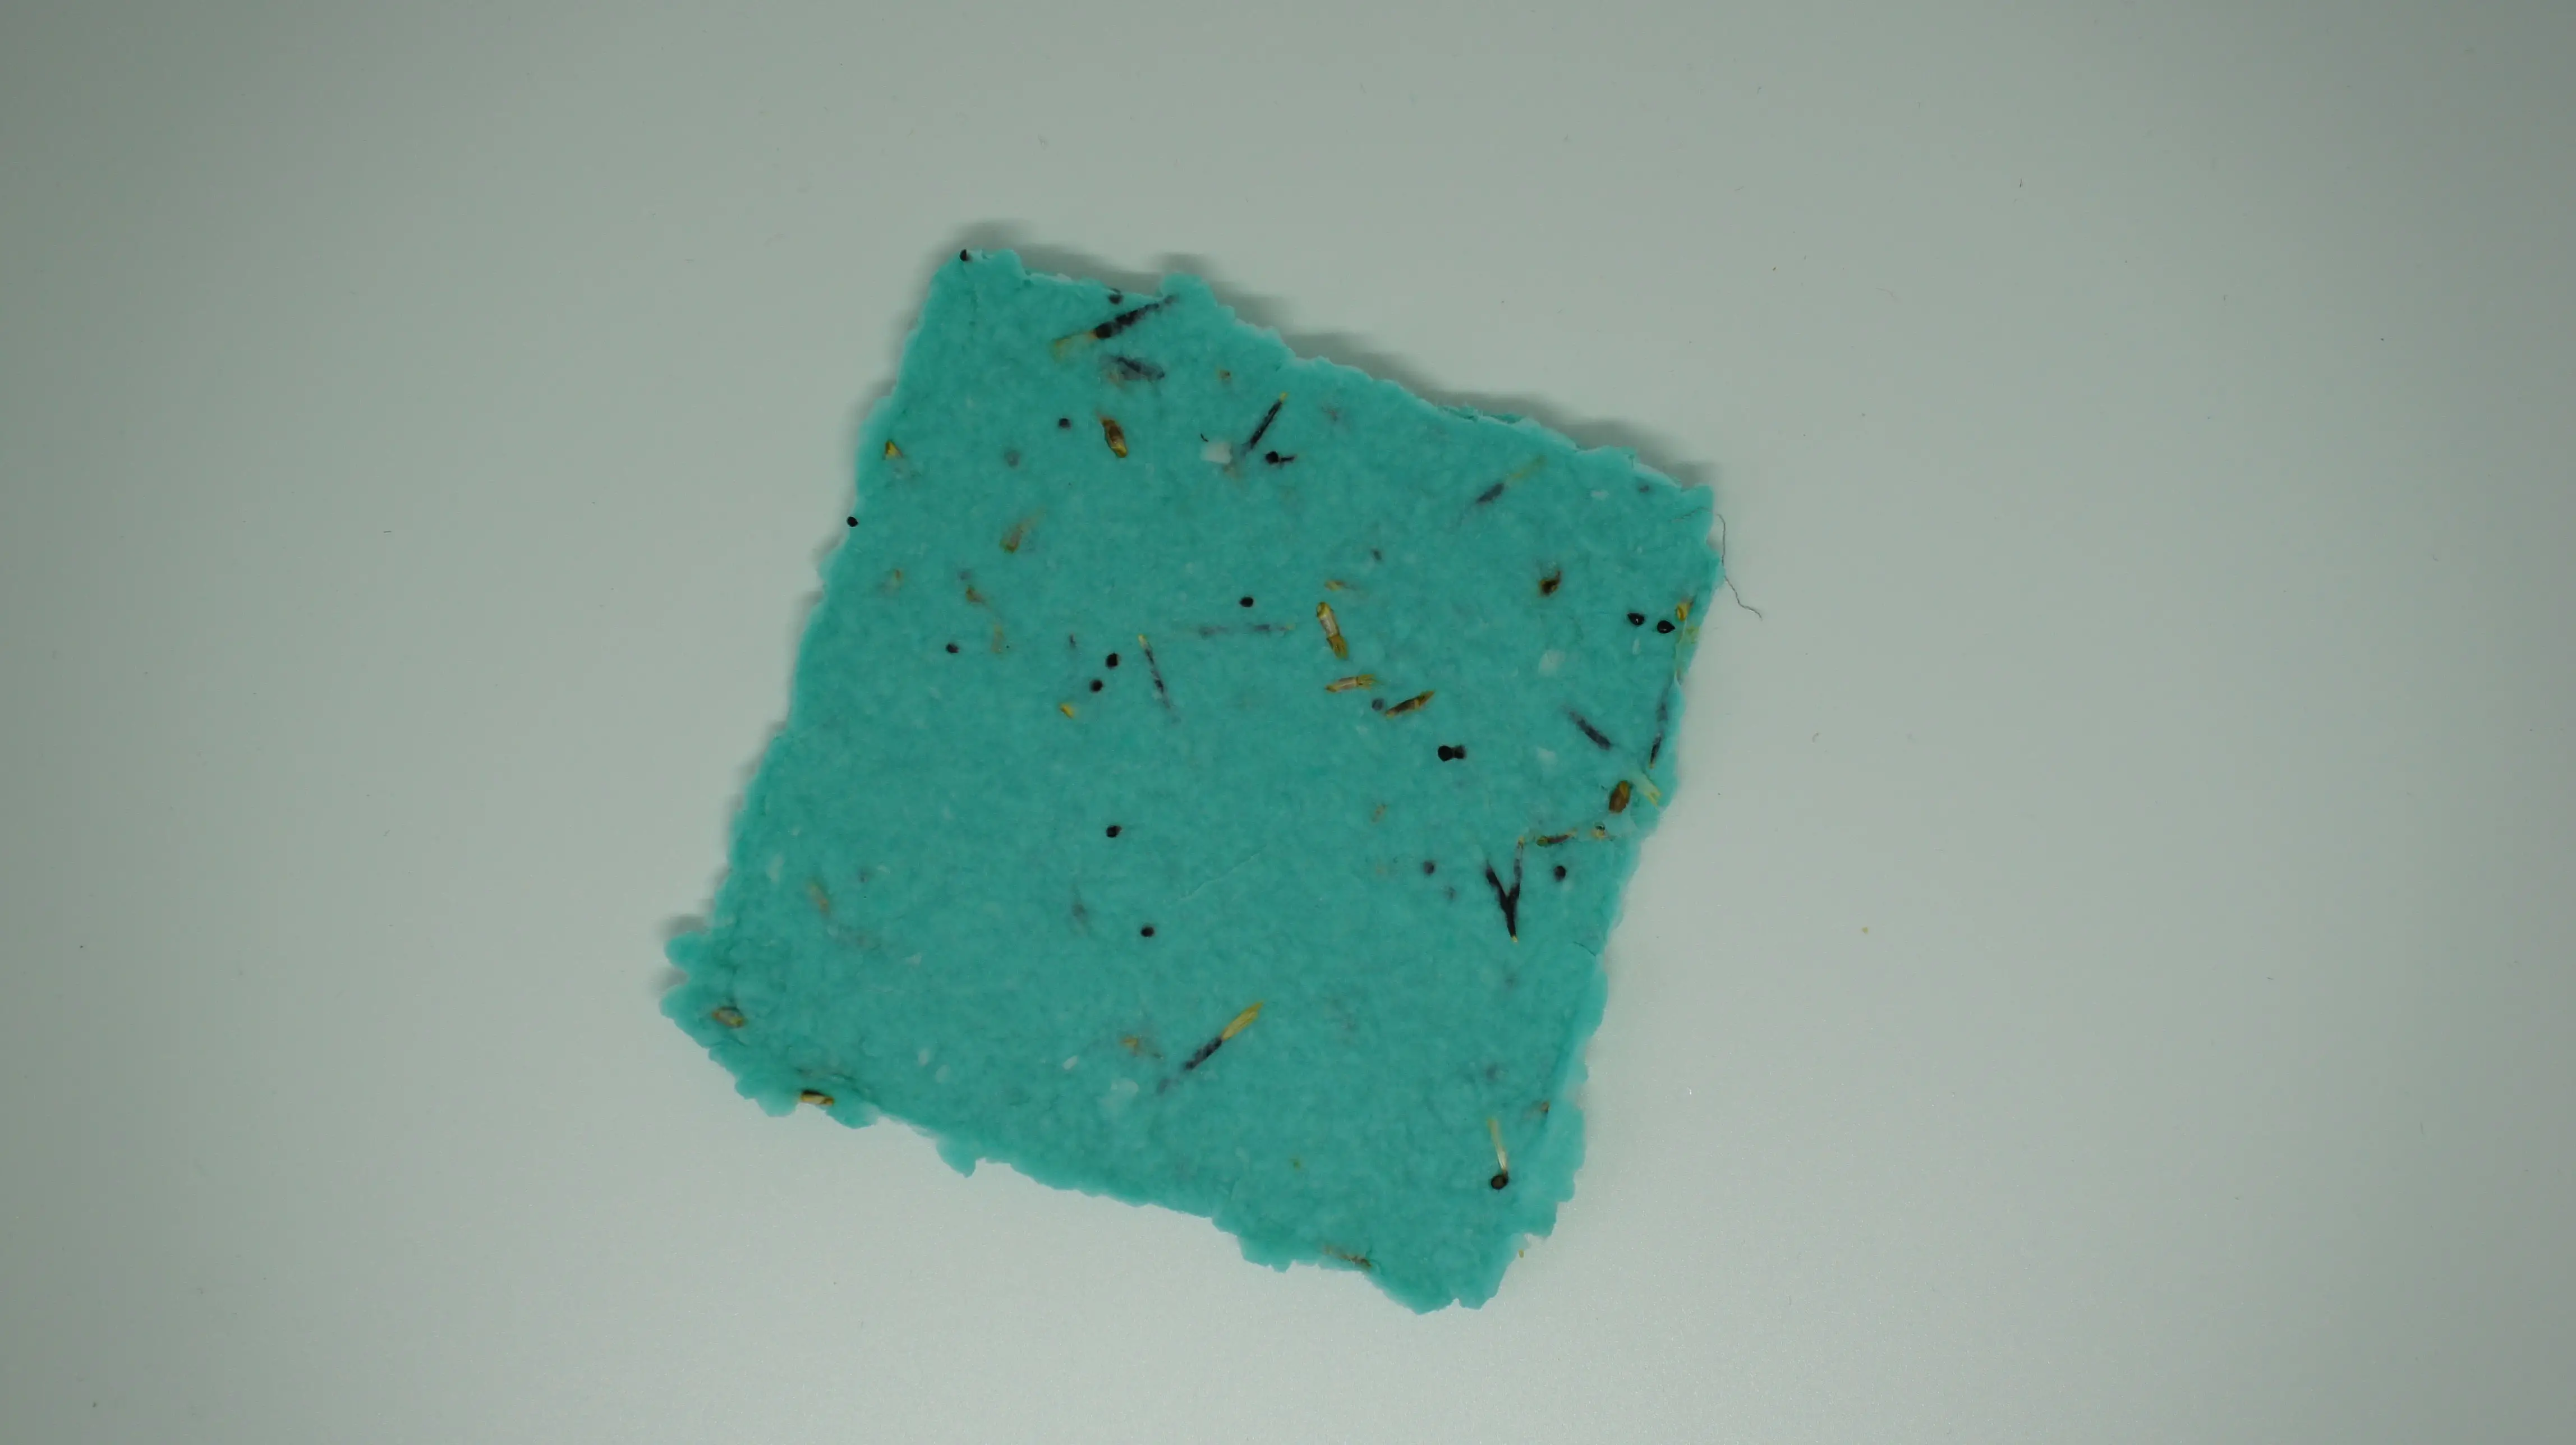 Wet seed paper